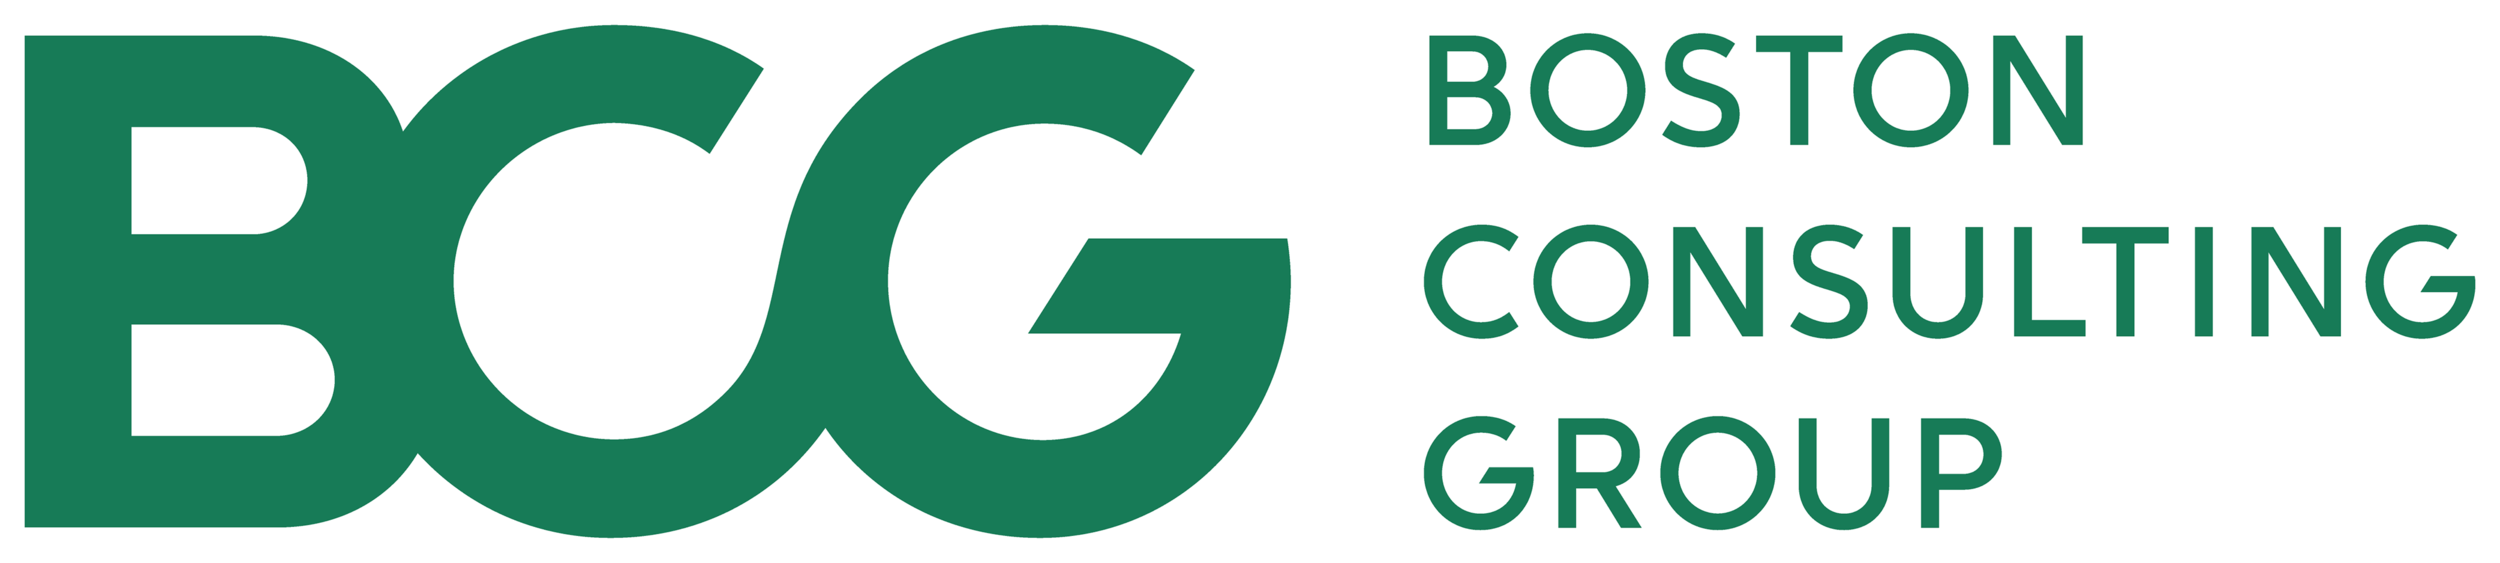 boston_consulting_group_logo.png